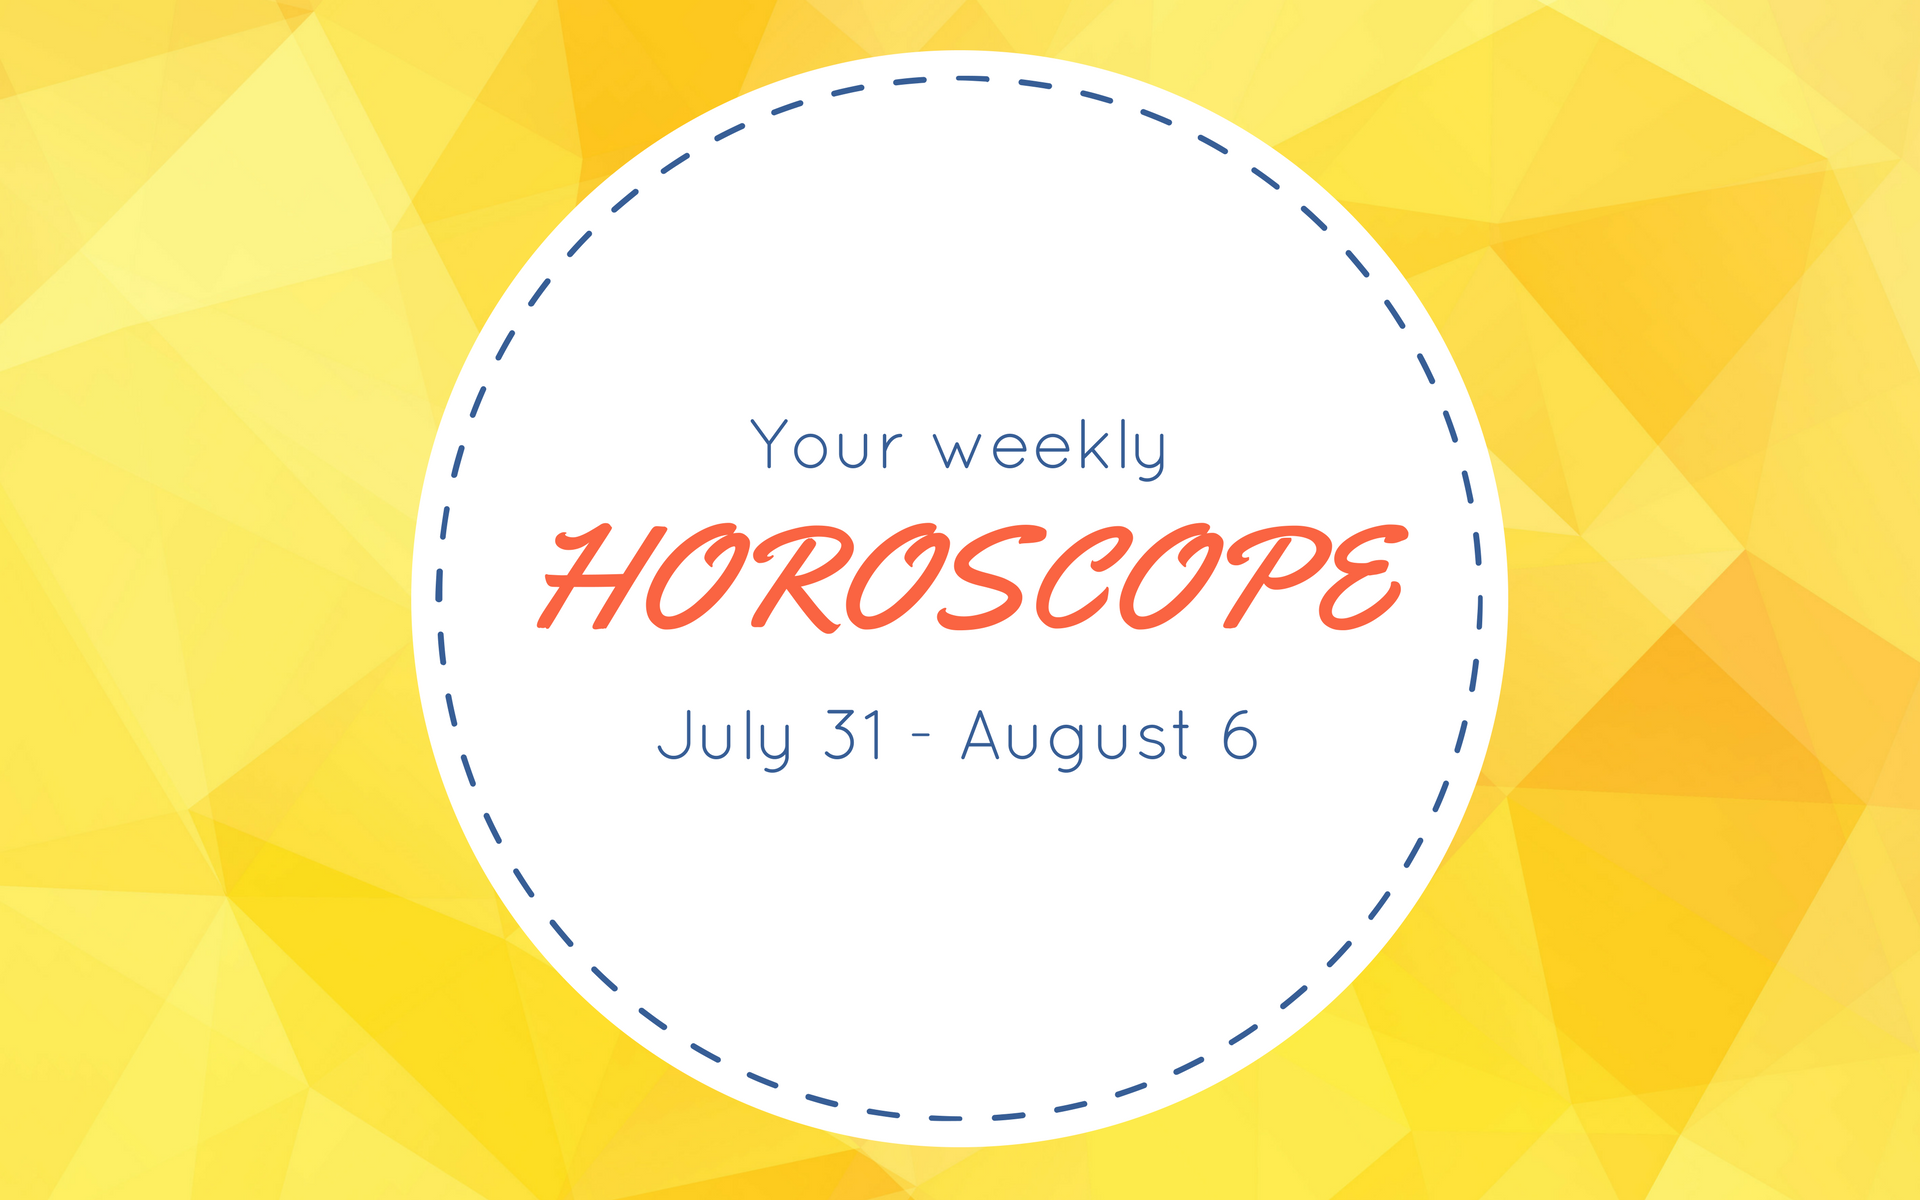 Your Weekly Horoscope: July 31 - August 6